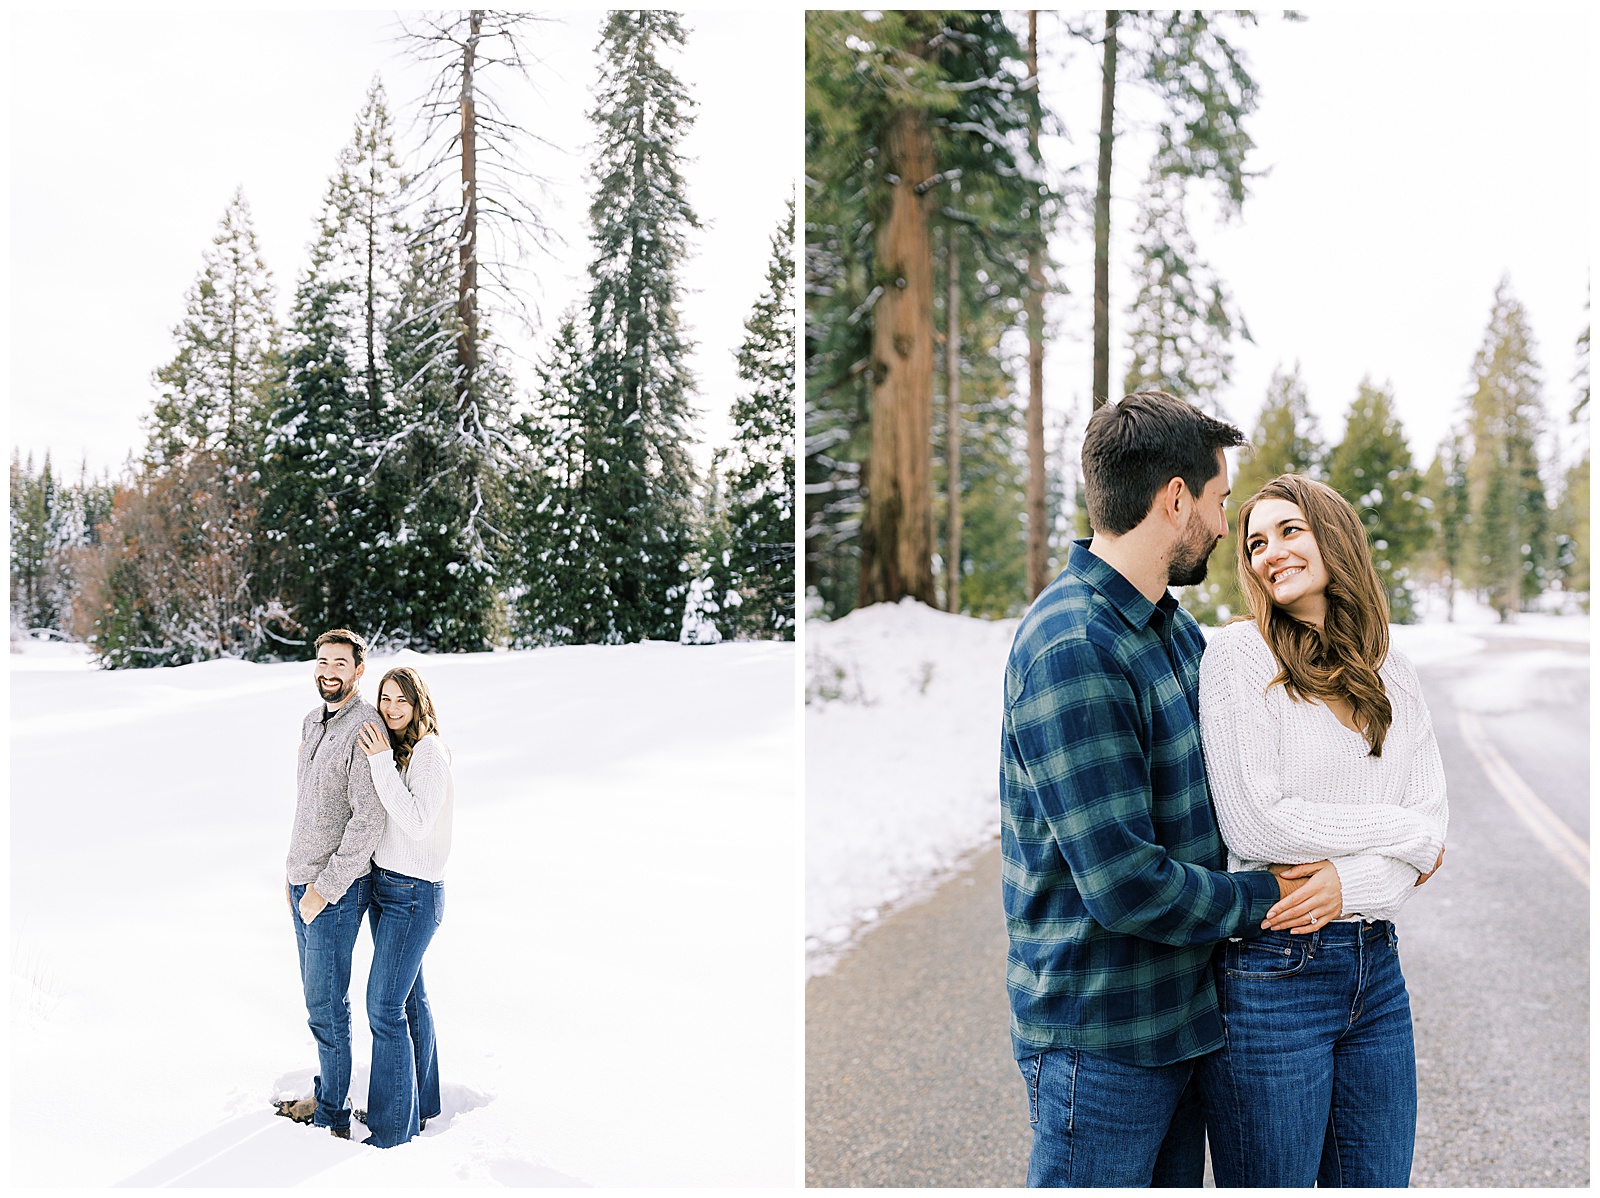 engaged couple embracing and smiling winter meadow snowy